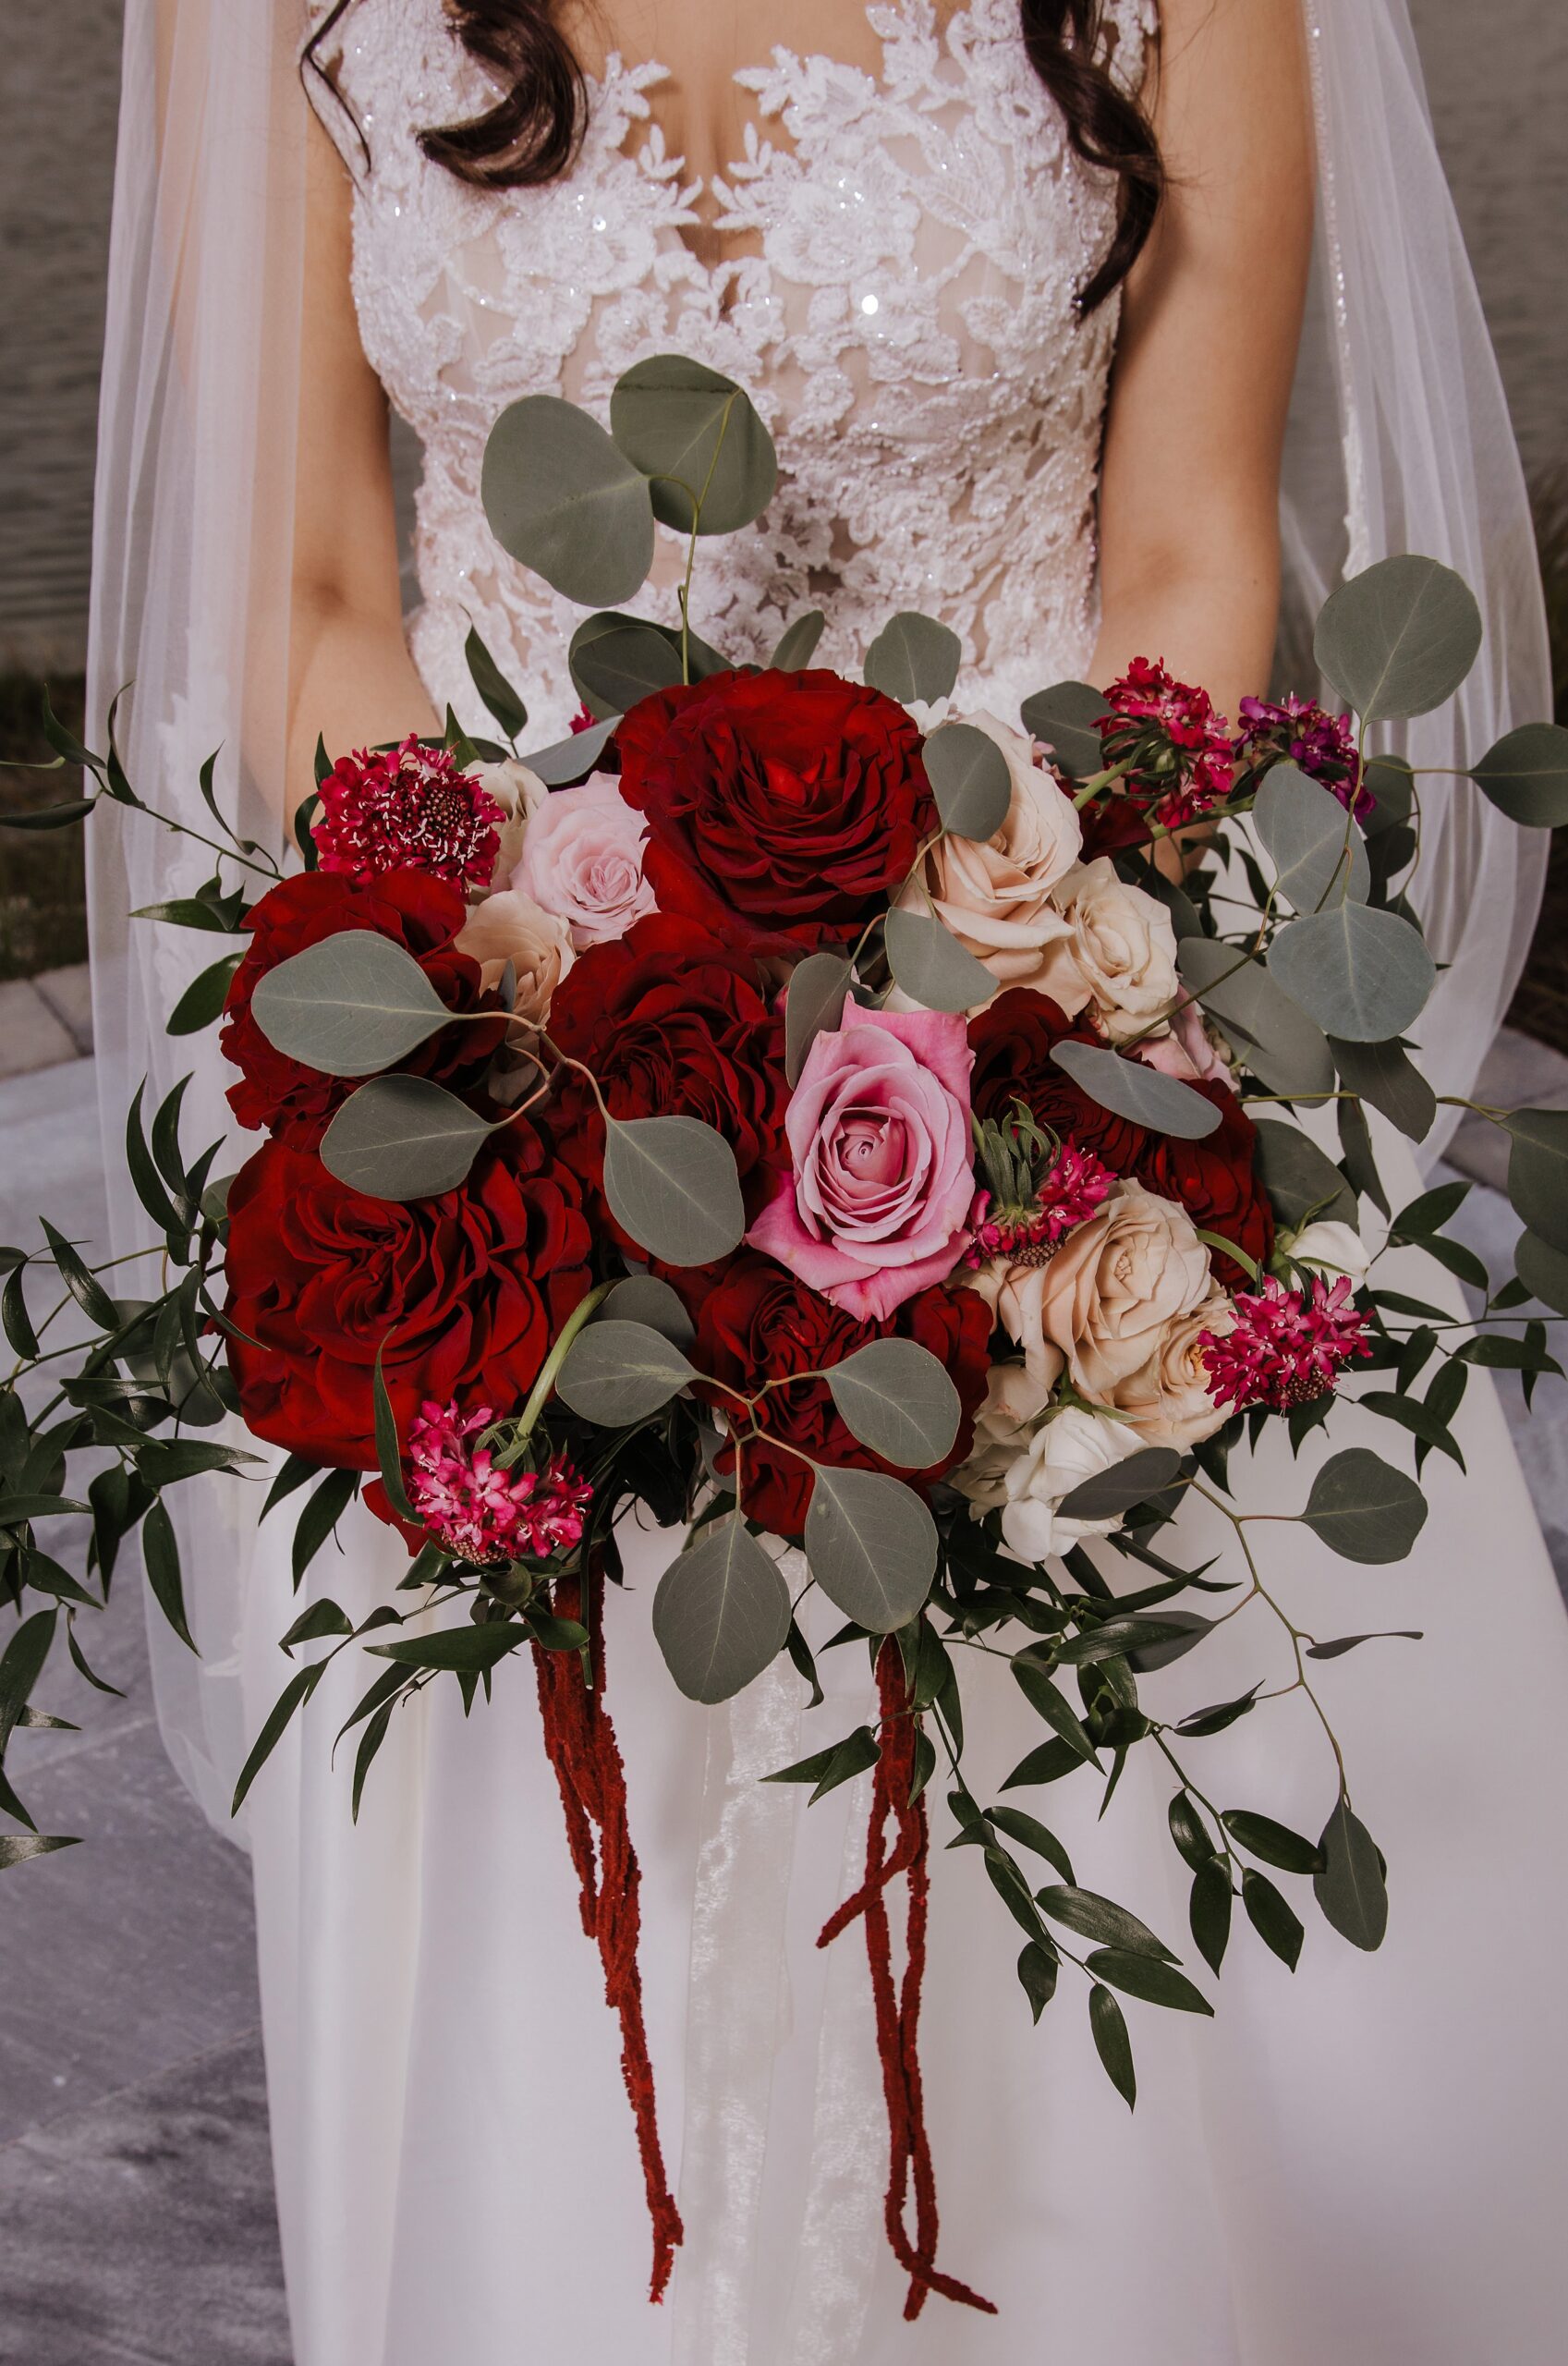 Details of a bride in a lace dress holding her bright red and pink rose bouquet at her the manor at 12 oaks farm